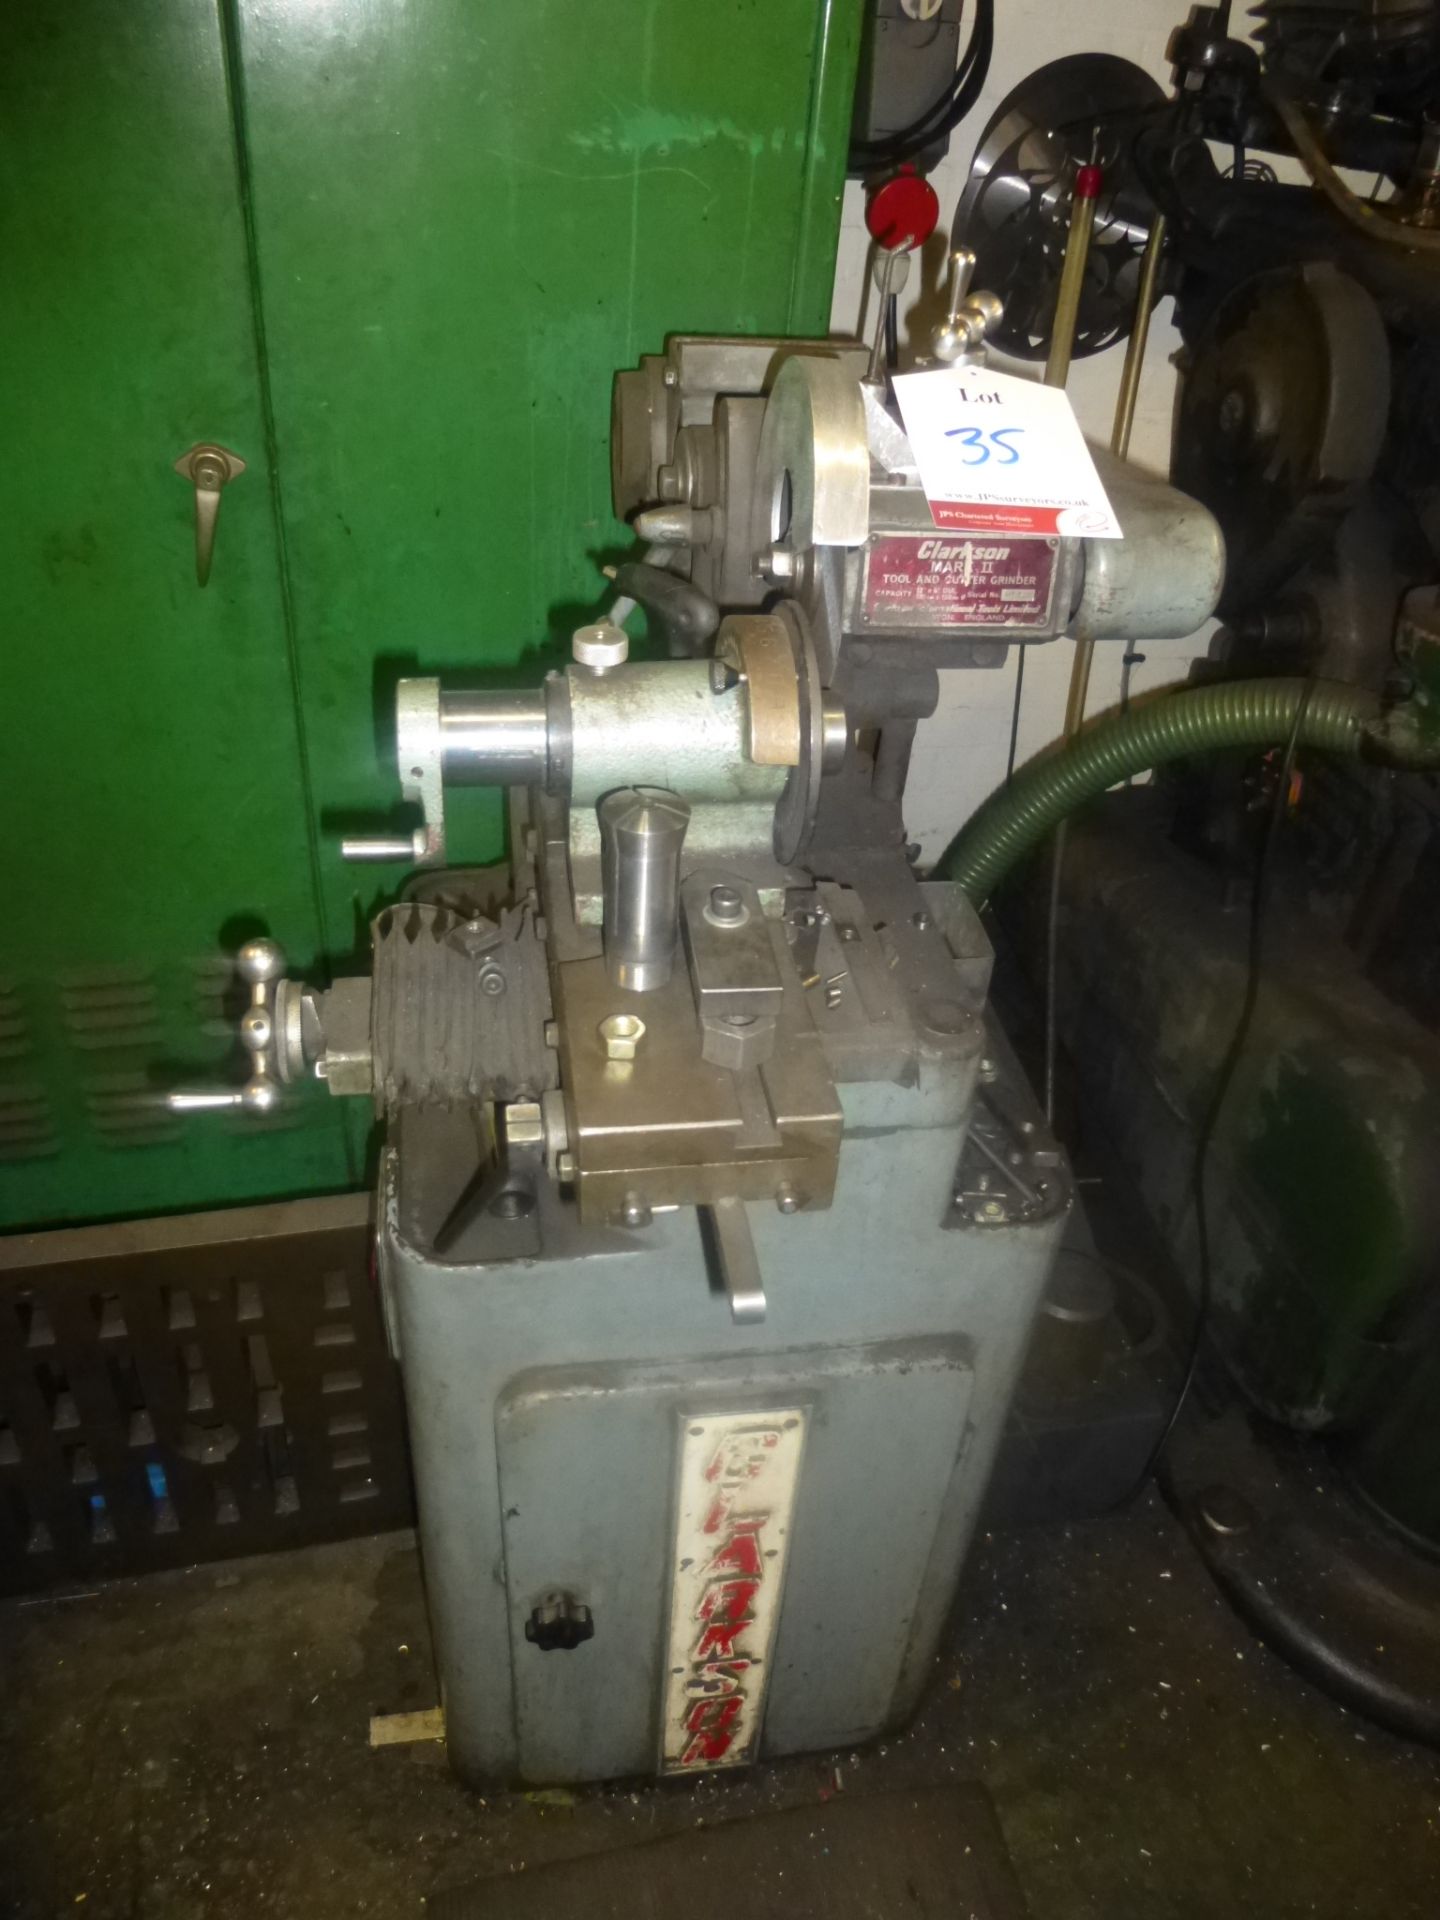 Clarkson Mark II tool and cutter grinder